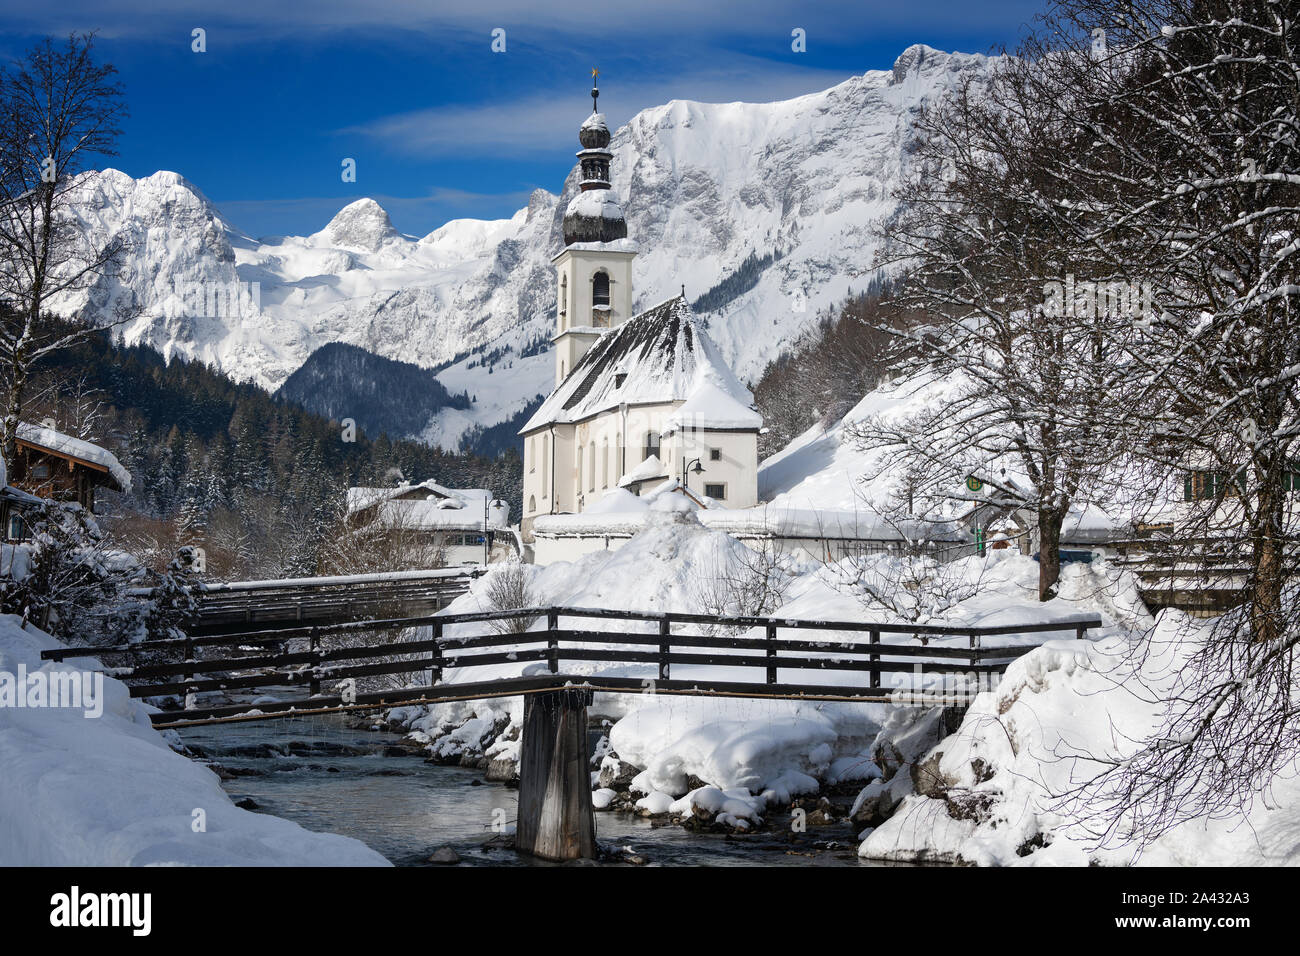 Church next to a mountain stream with a bridge and Alps mountains, covered in snow in a landscape in Ramsau bei Berchtesgaden, Germany. Stock Photo